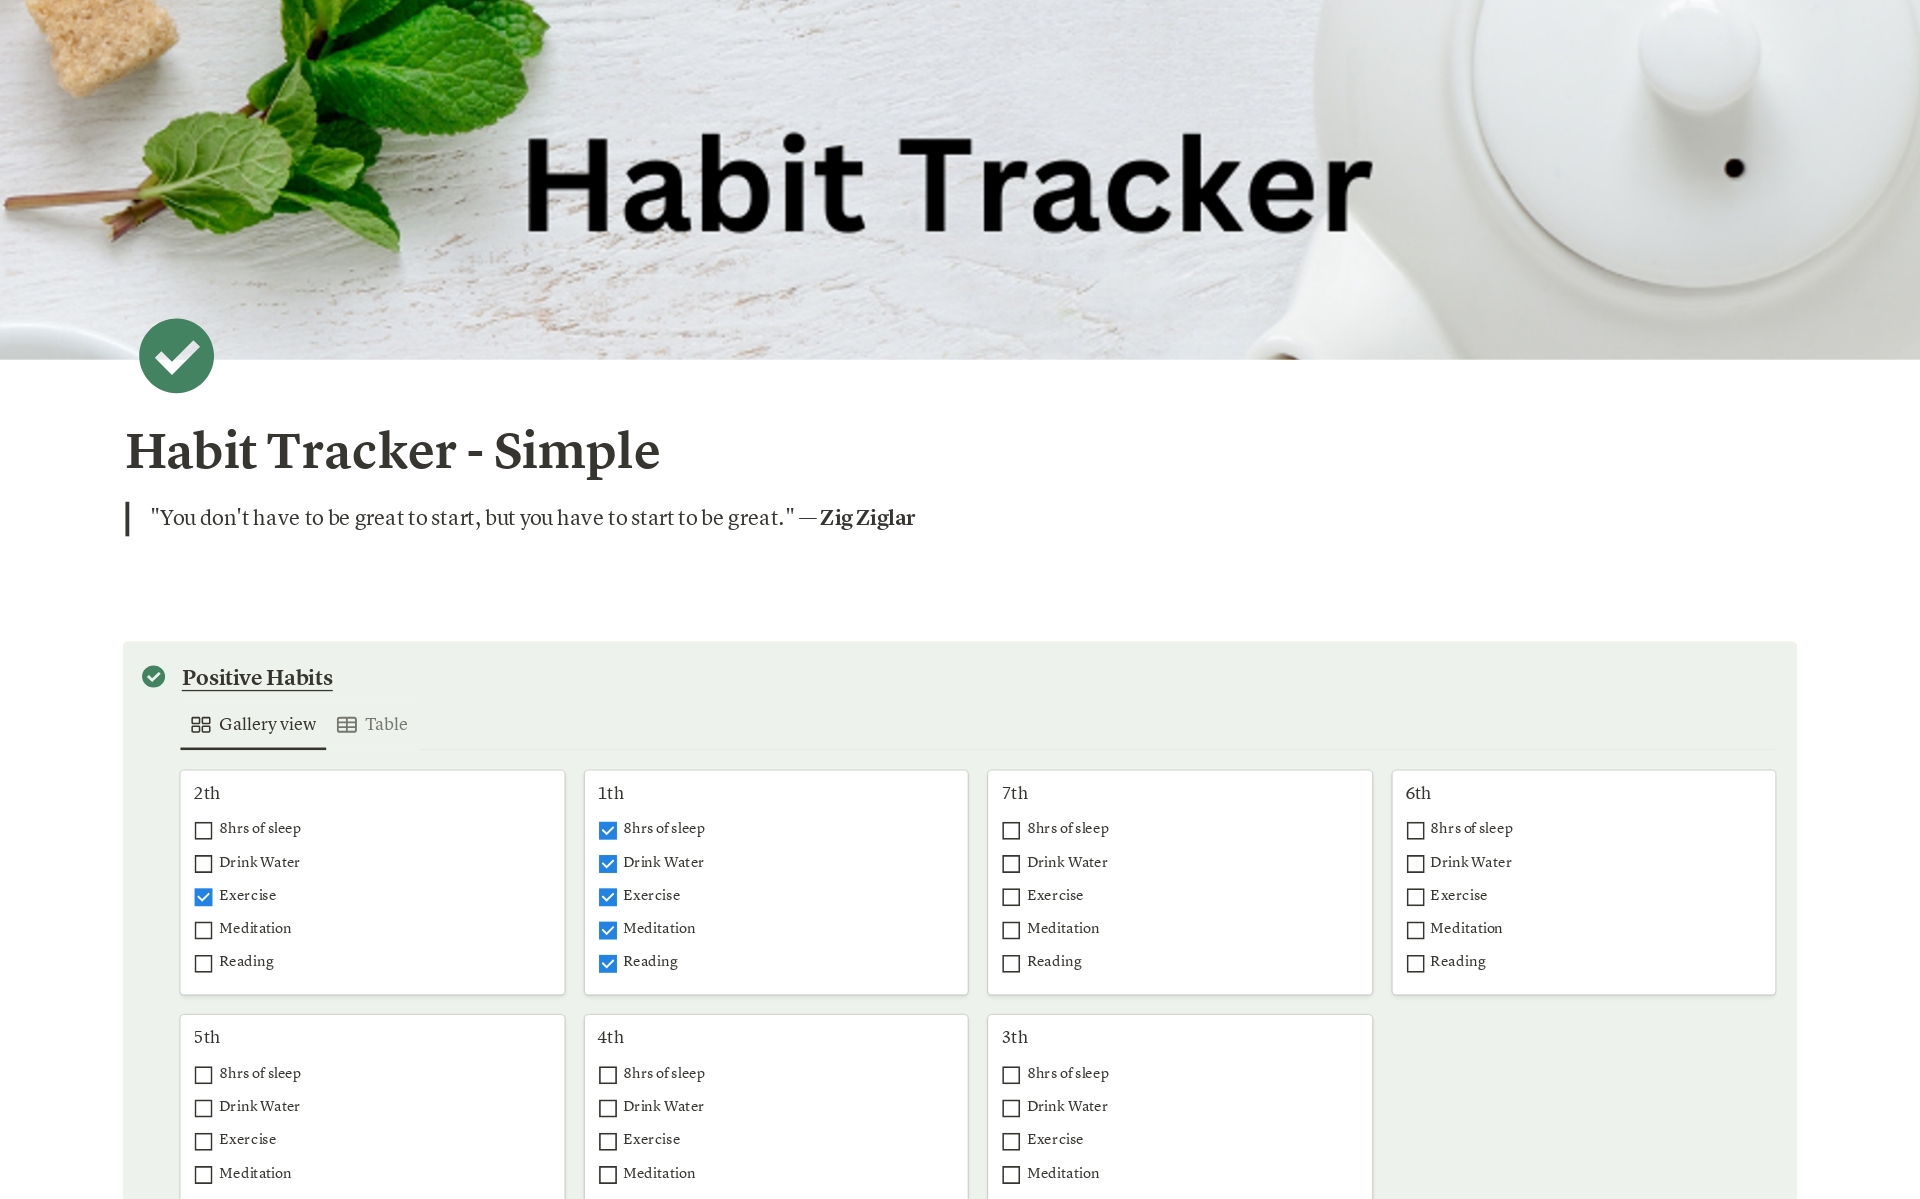 Habit Tracker with Positive and Negative Habits
Streamline your personal development journey with this comprehensive Habit Tracker. Track and transform both positive and negative habits, and achieve your goals with structured daily, weekly, and monthly insights.